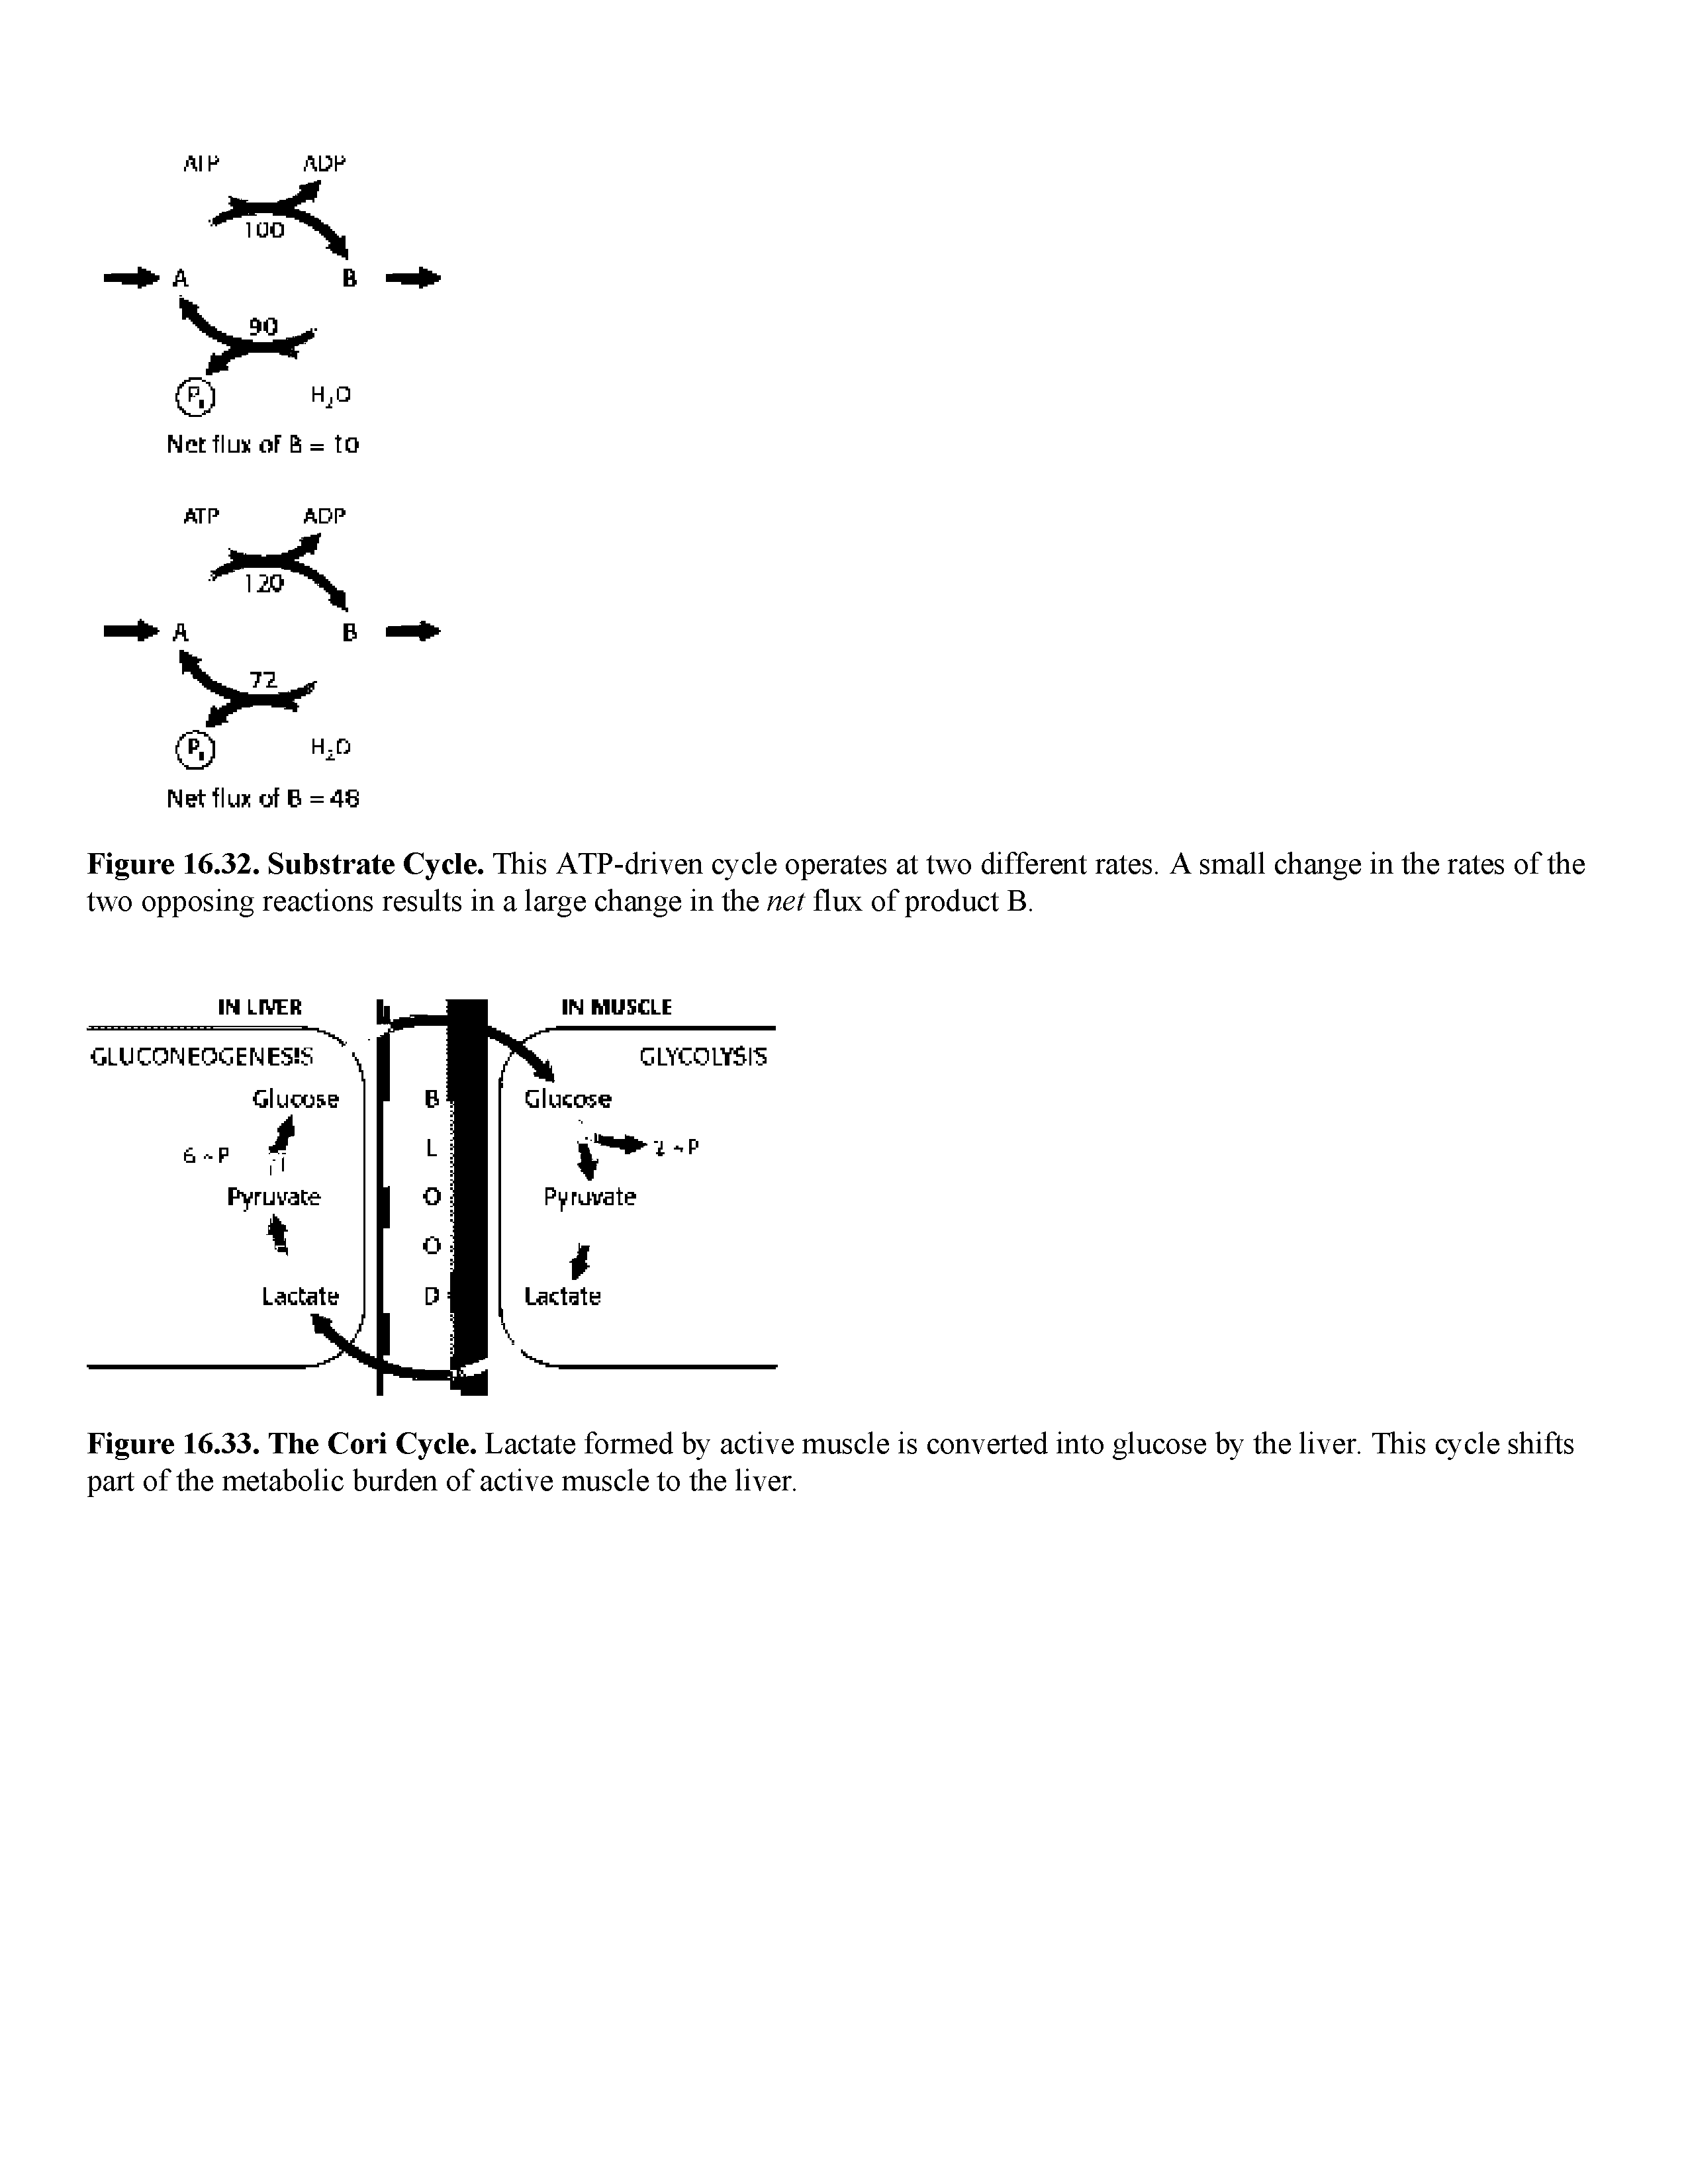 Figure 16.32. Substrate Cycle. This ATP-driven cycle operates at two different rates. A small change in the rates of the two opposing reactions results in a large change in the net flux of product B.